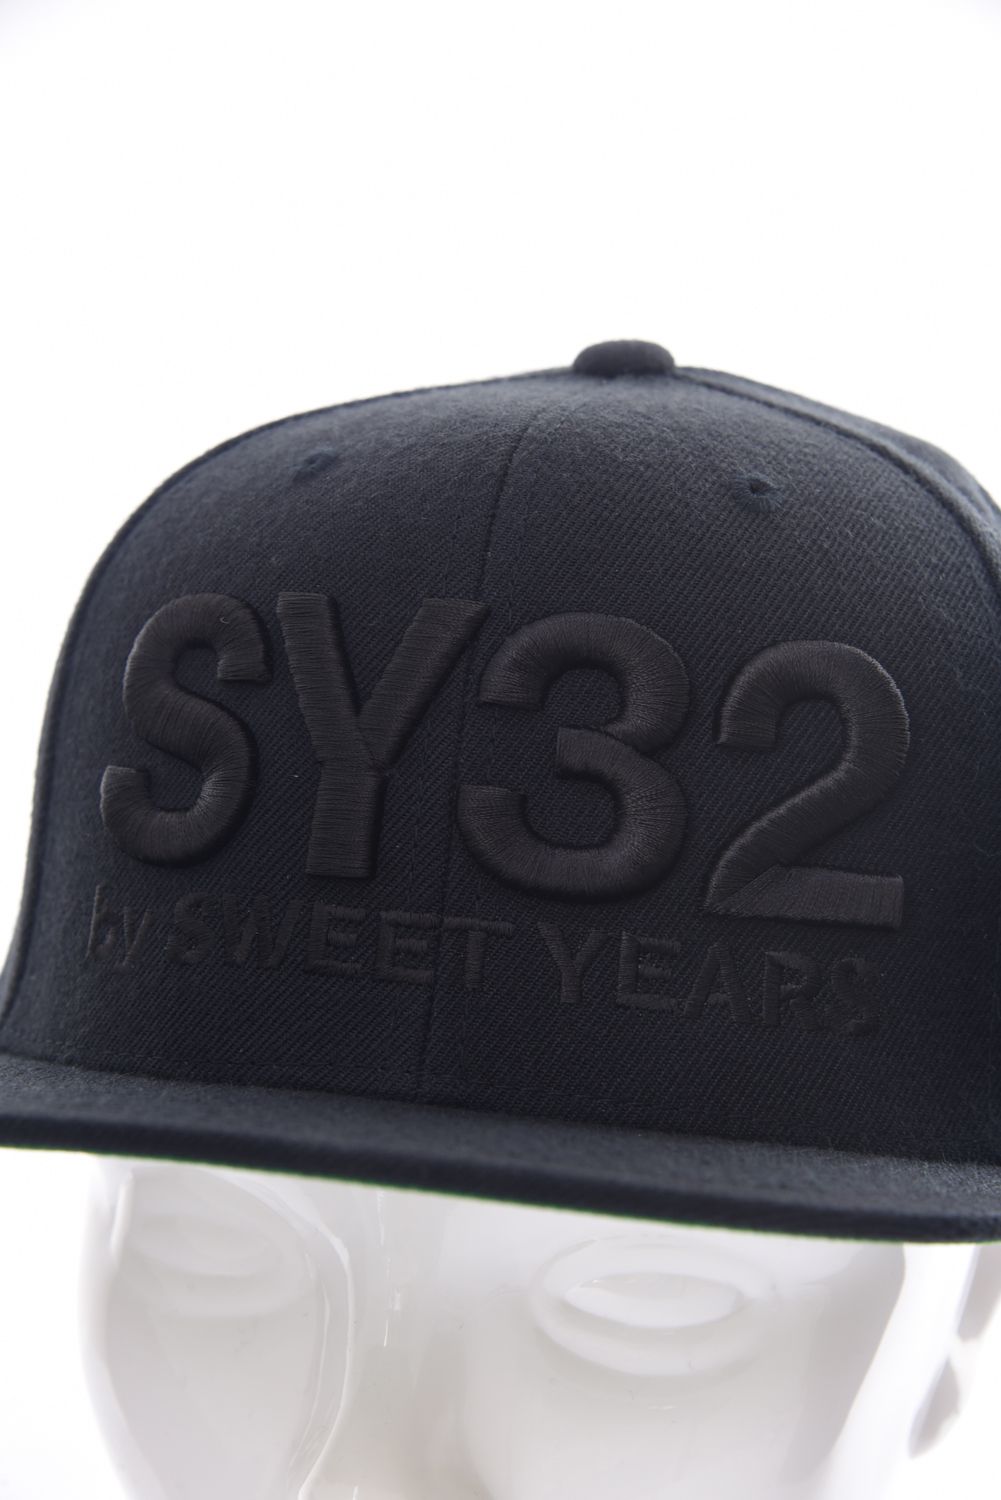 SY32 by SWEET YEARS GOLF - 3D LOGO SNAPBACK CAP / 3Dロゴ スナップ